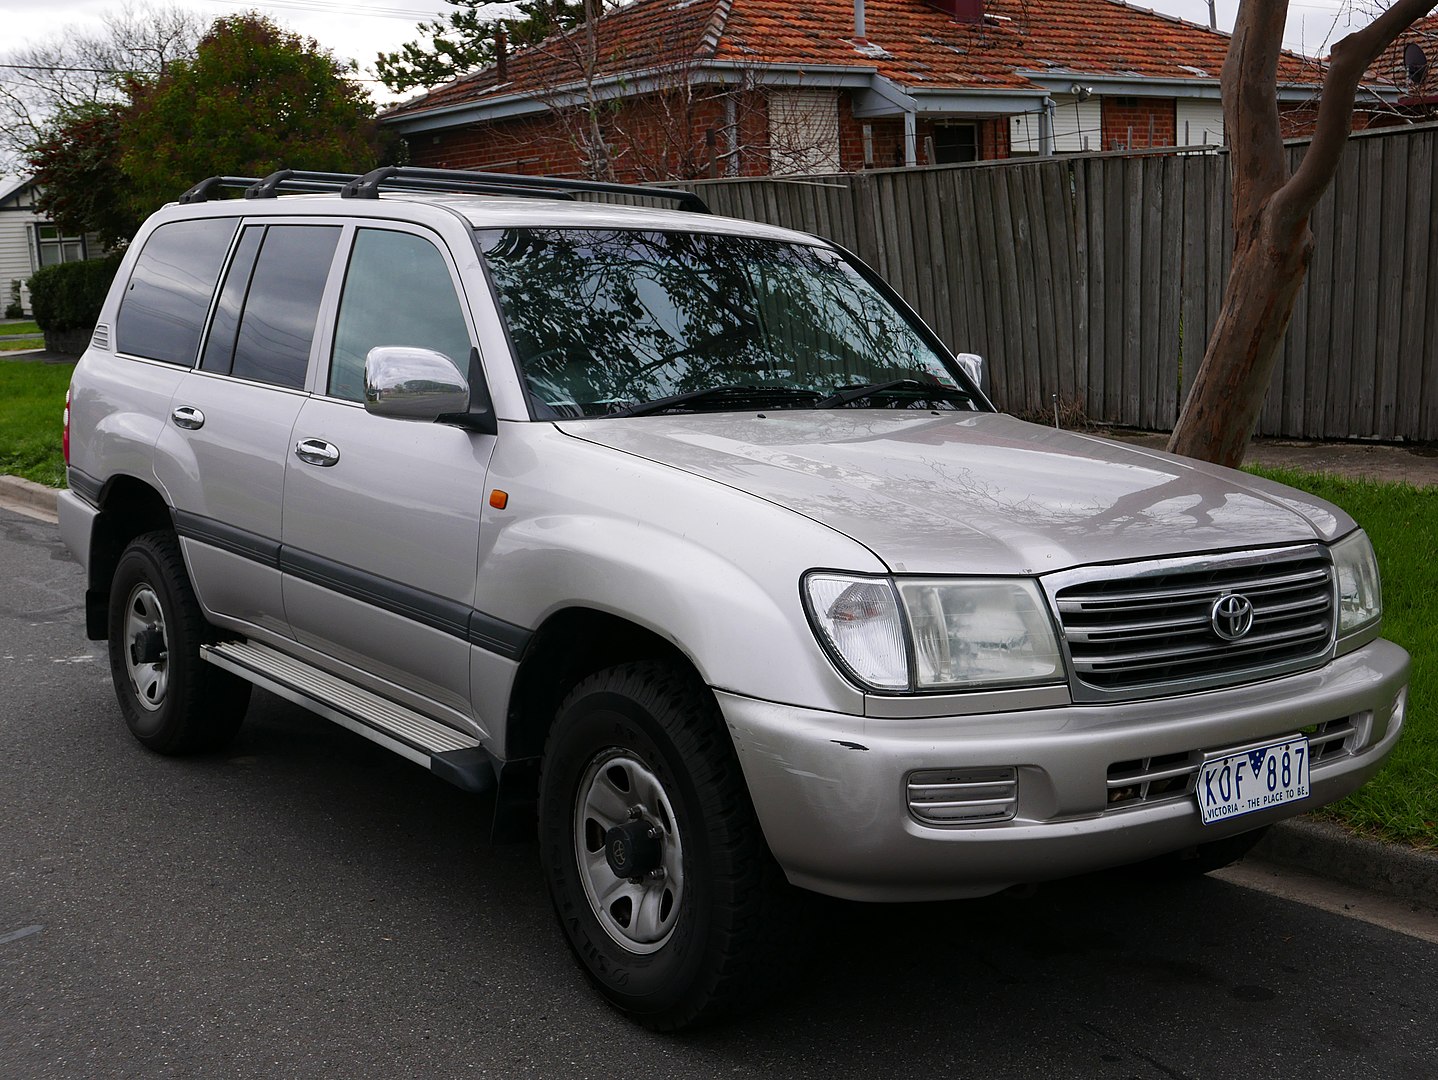 Example of a Land Cruiser J100